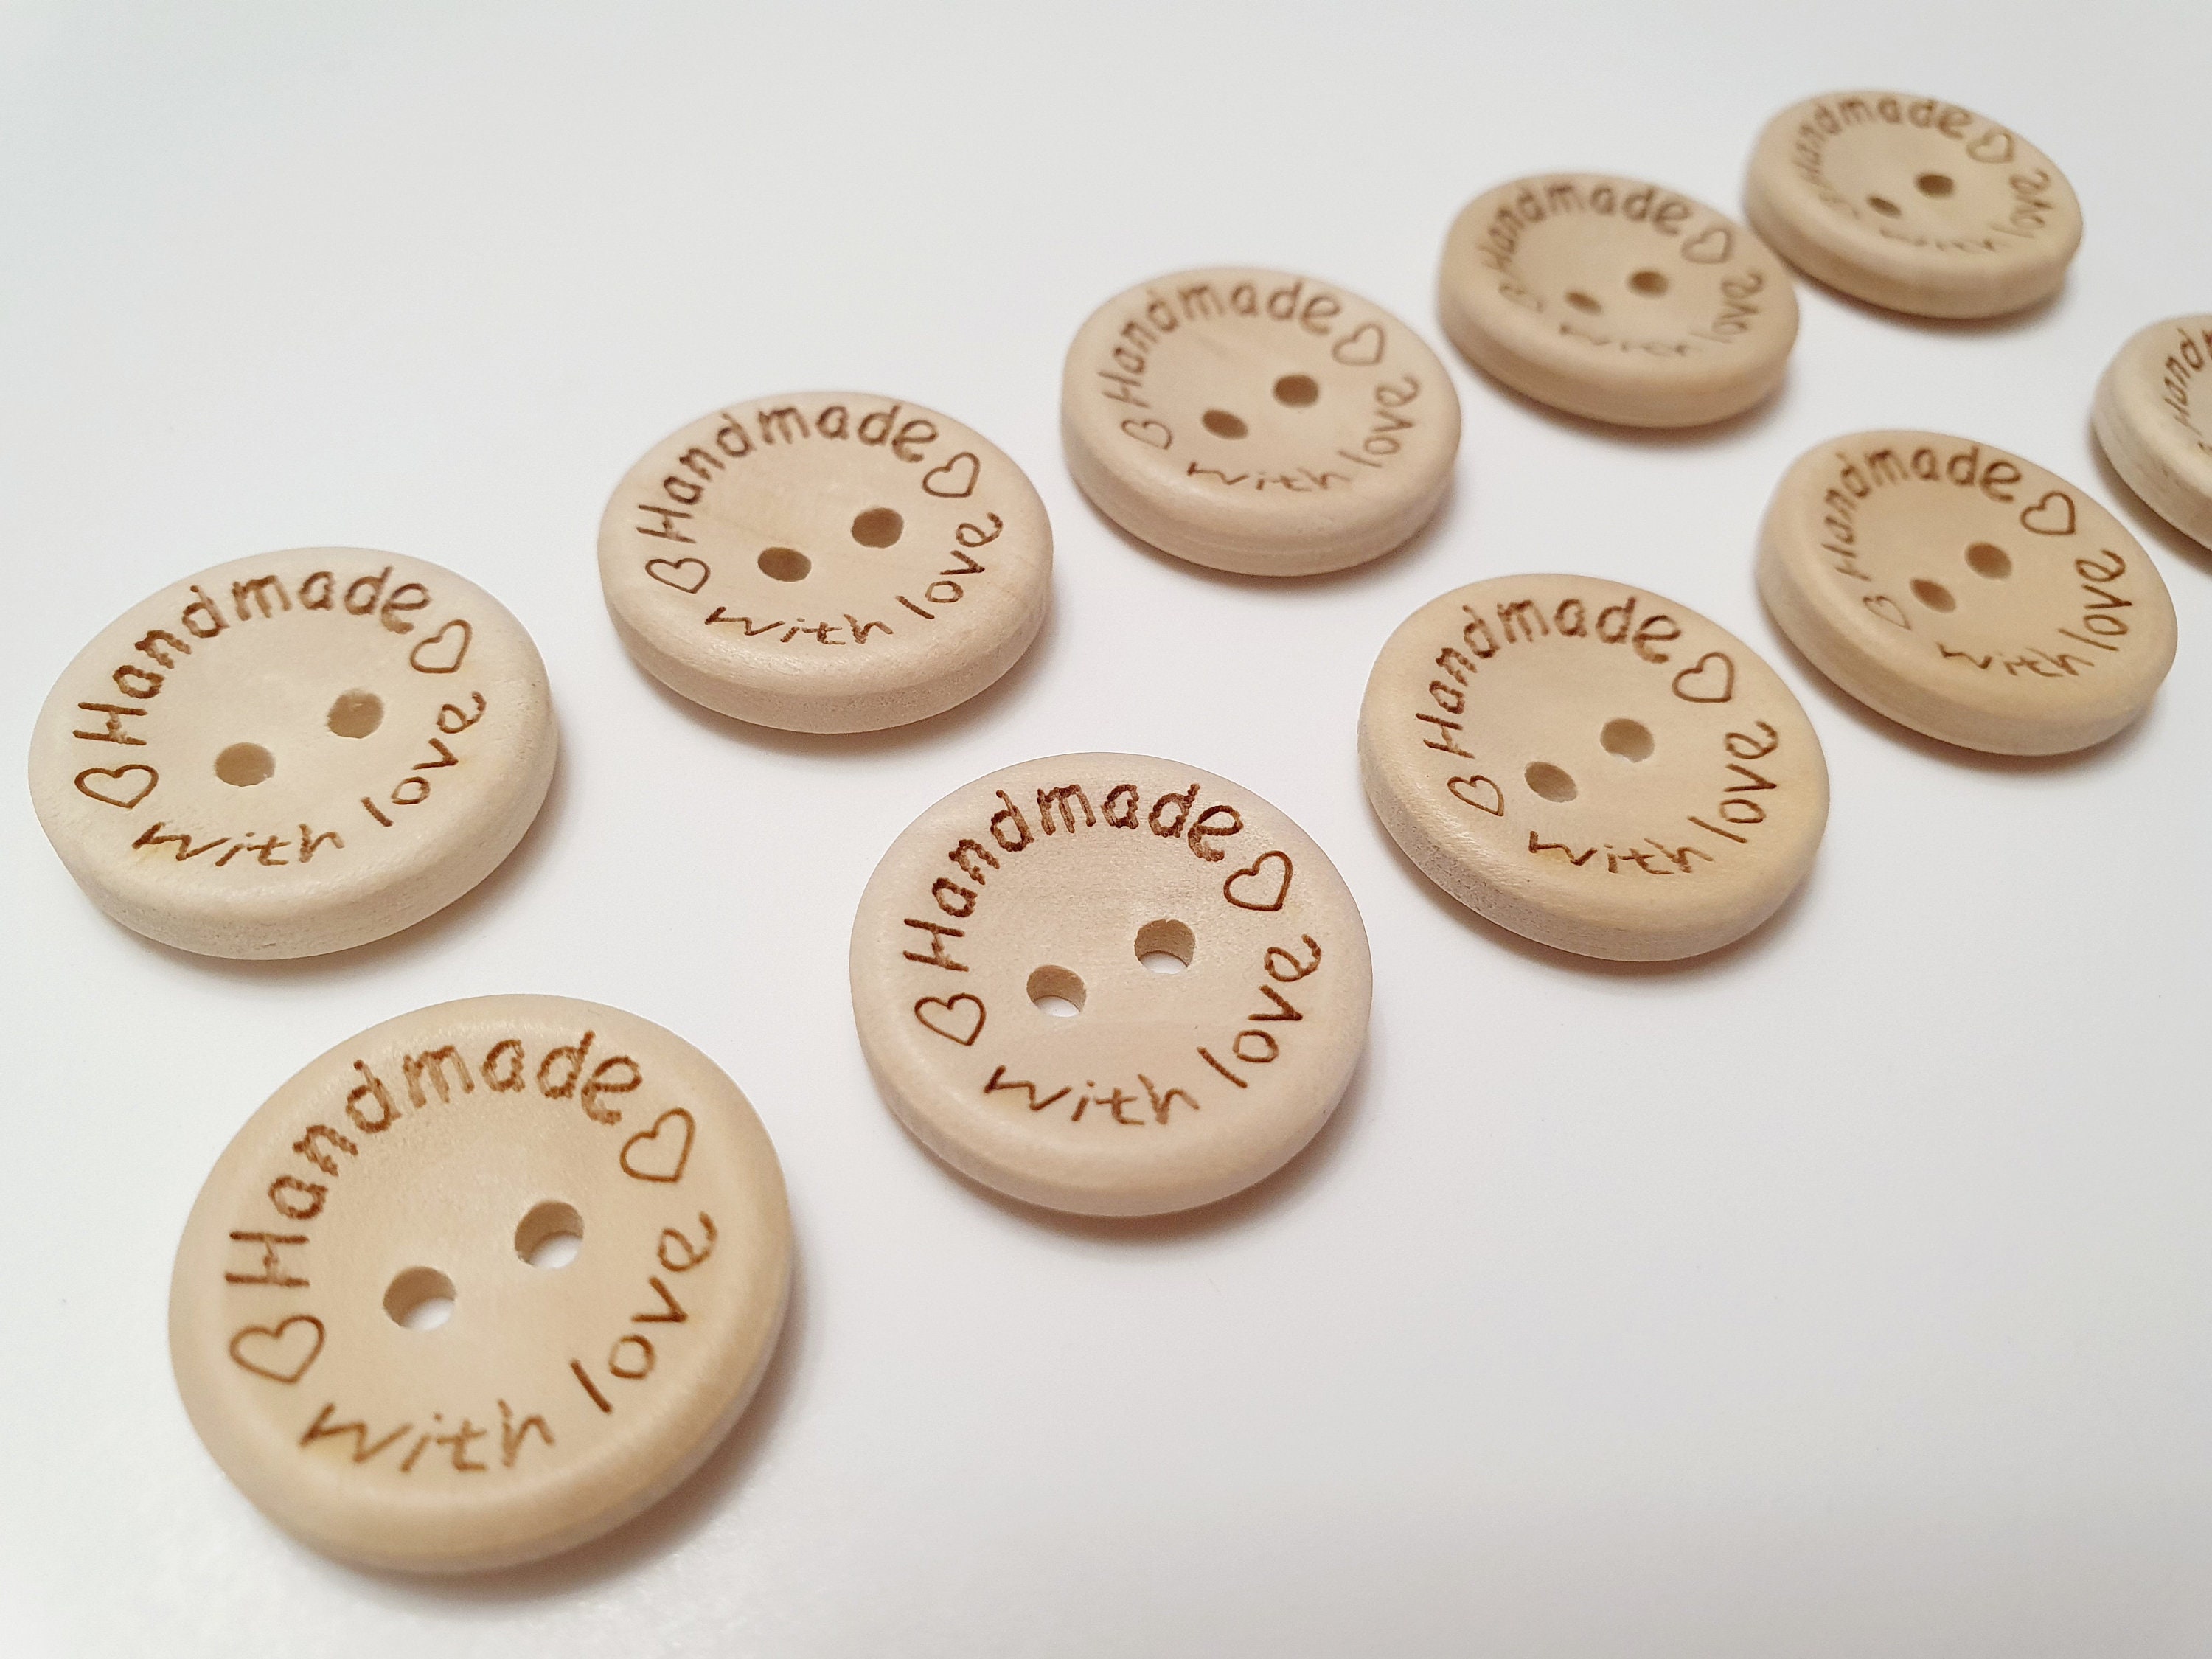 DIY CRAFT WOOD"HANDMADE WITH LOVE BUTTONS" 2 SIZES 10